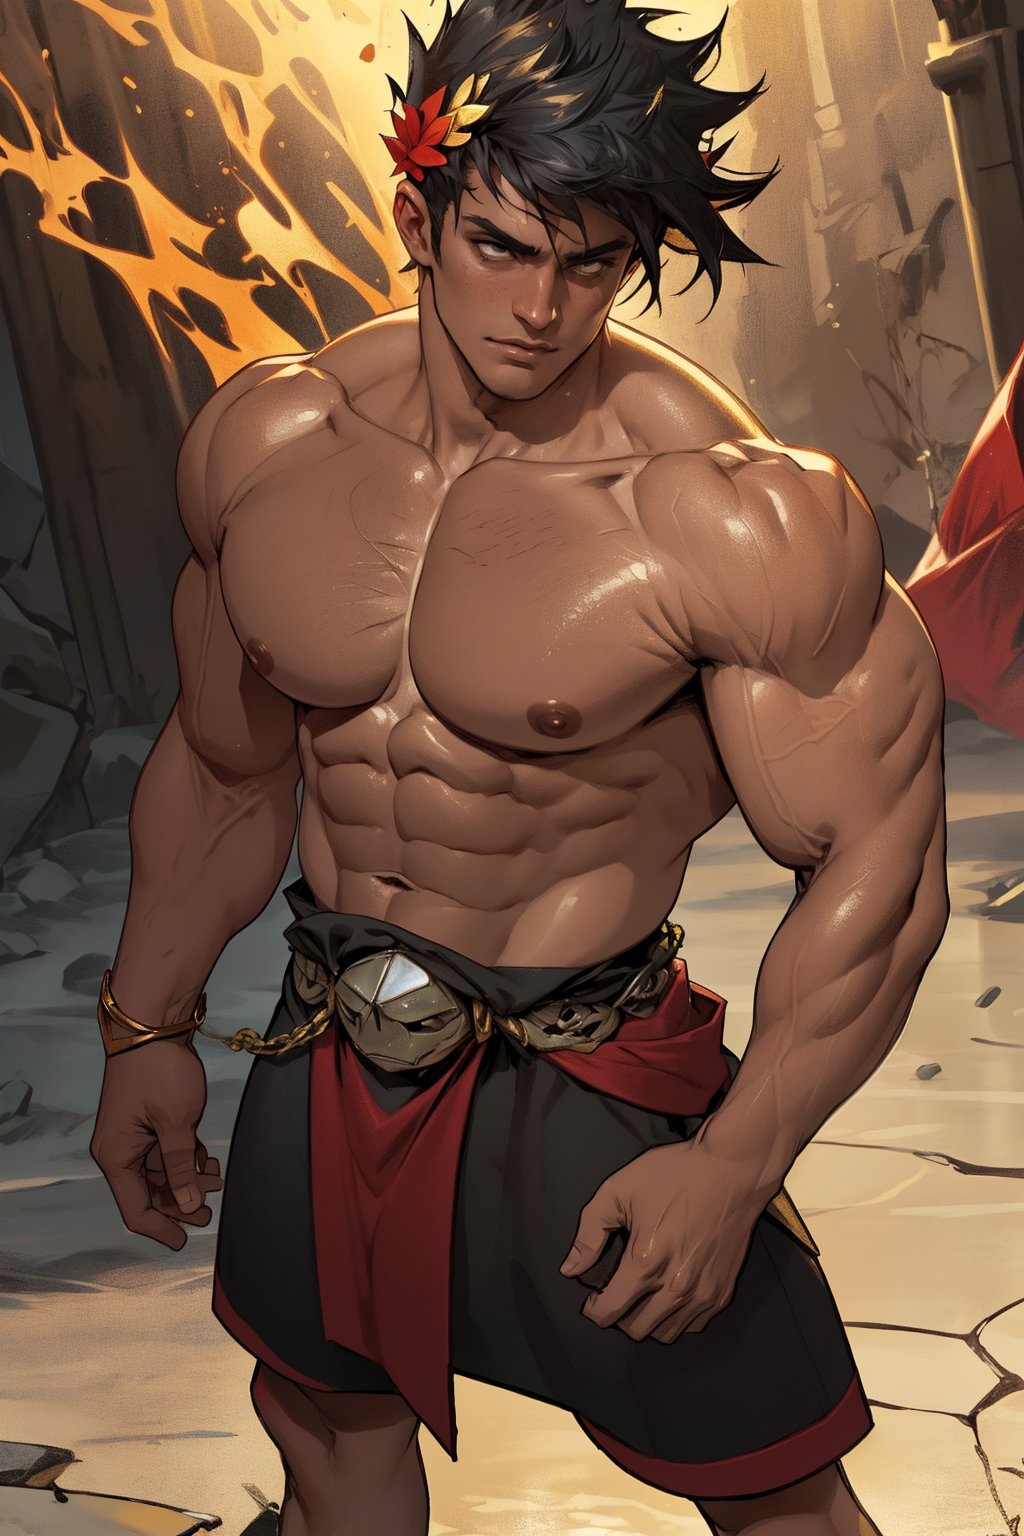 A razor-sharp close-up frames Zagreus' chiseled physique, highlighting defined muscles as he stands confidently with feet shoulder-width apart. Warm lighting accentuates chest and arm contours, casting a golden glow on rugged features. Background blurred, attention focused solely on the powerful demon's imposing presence.